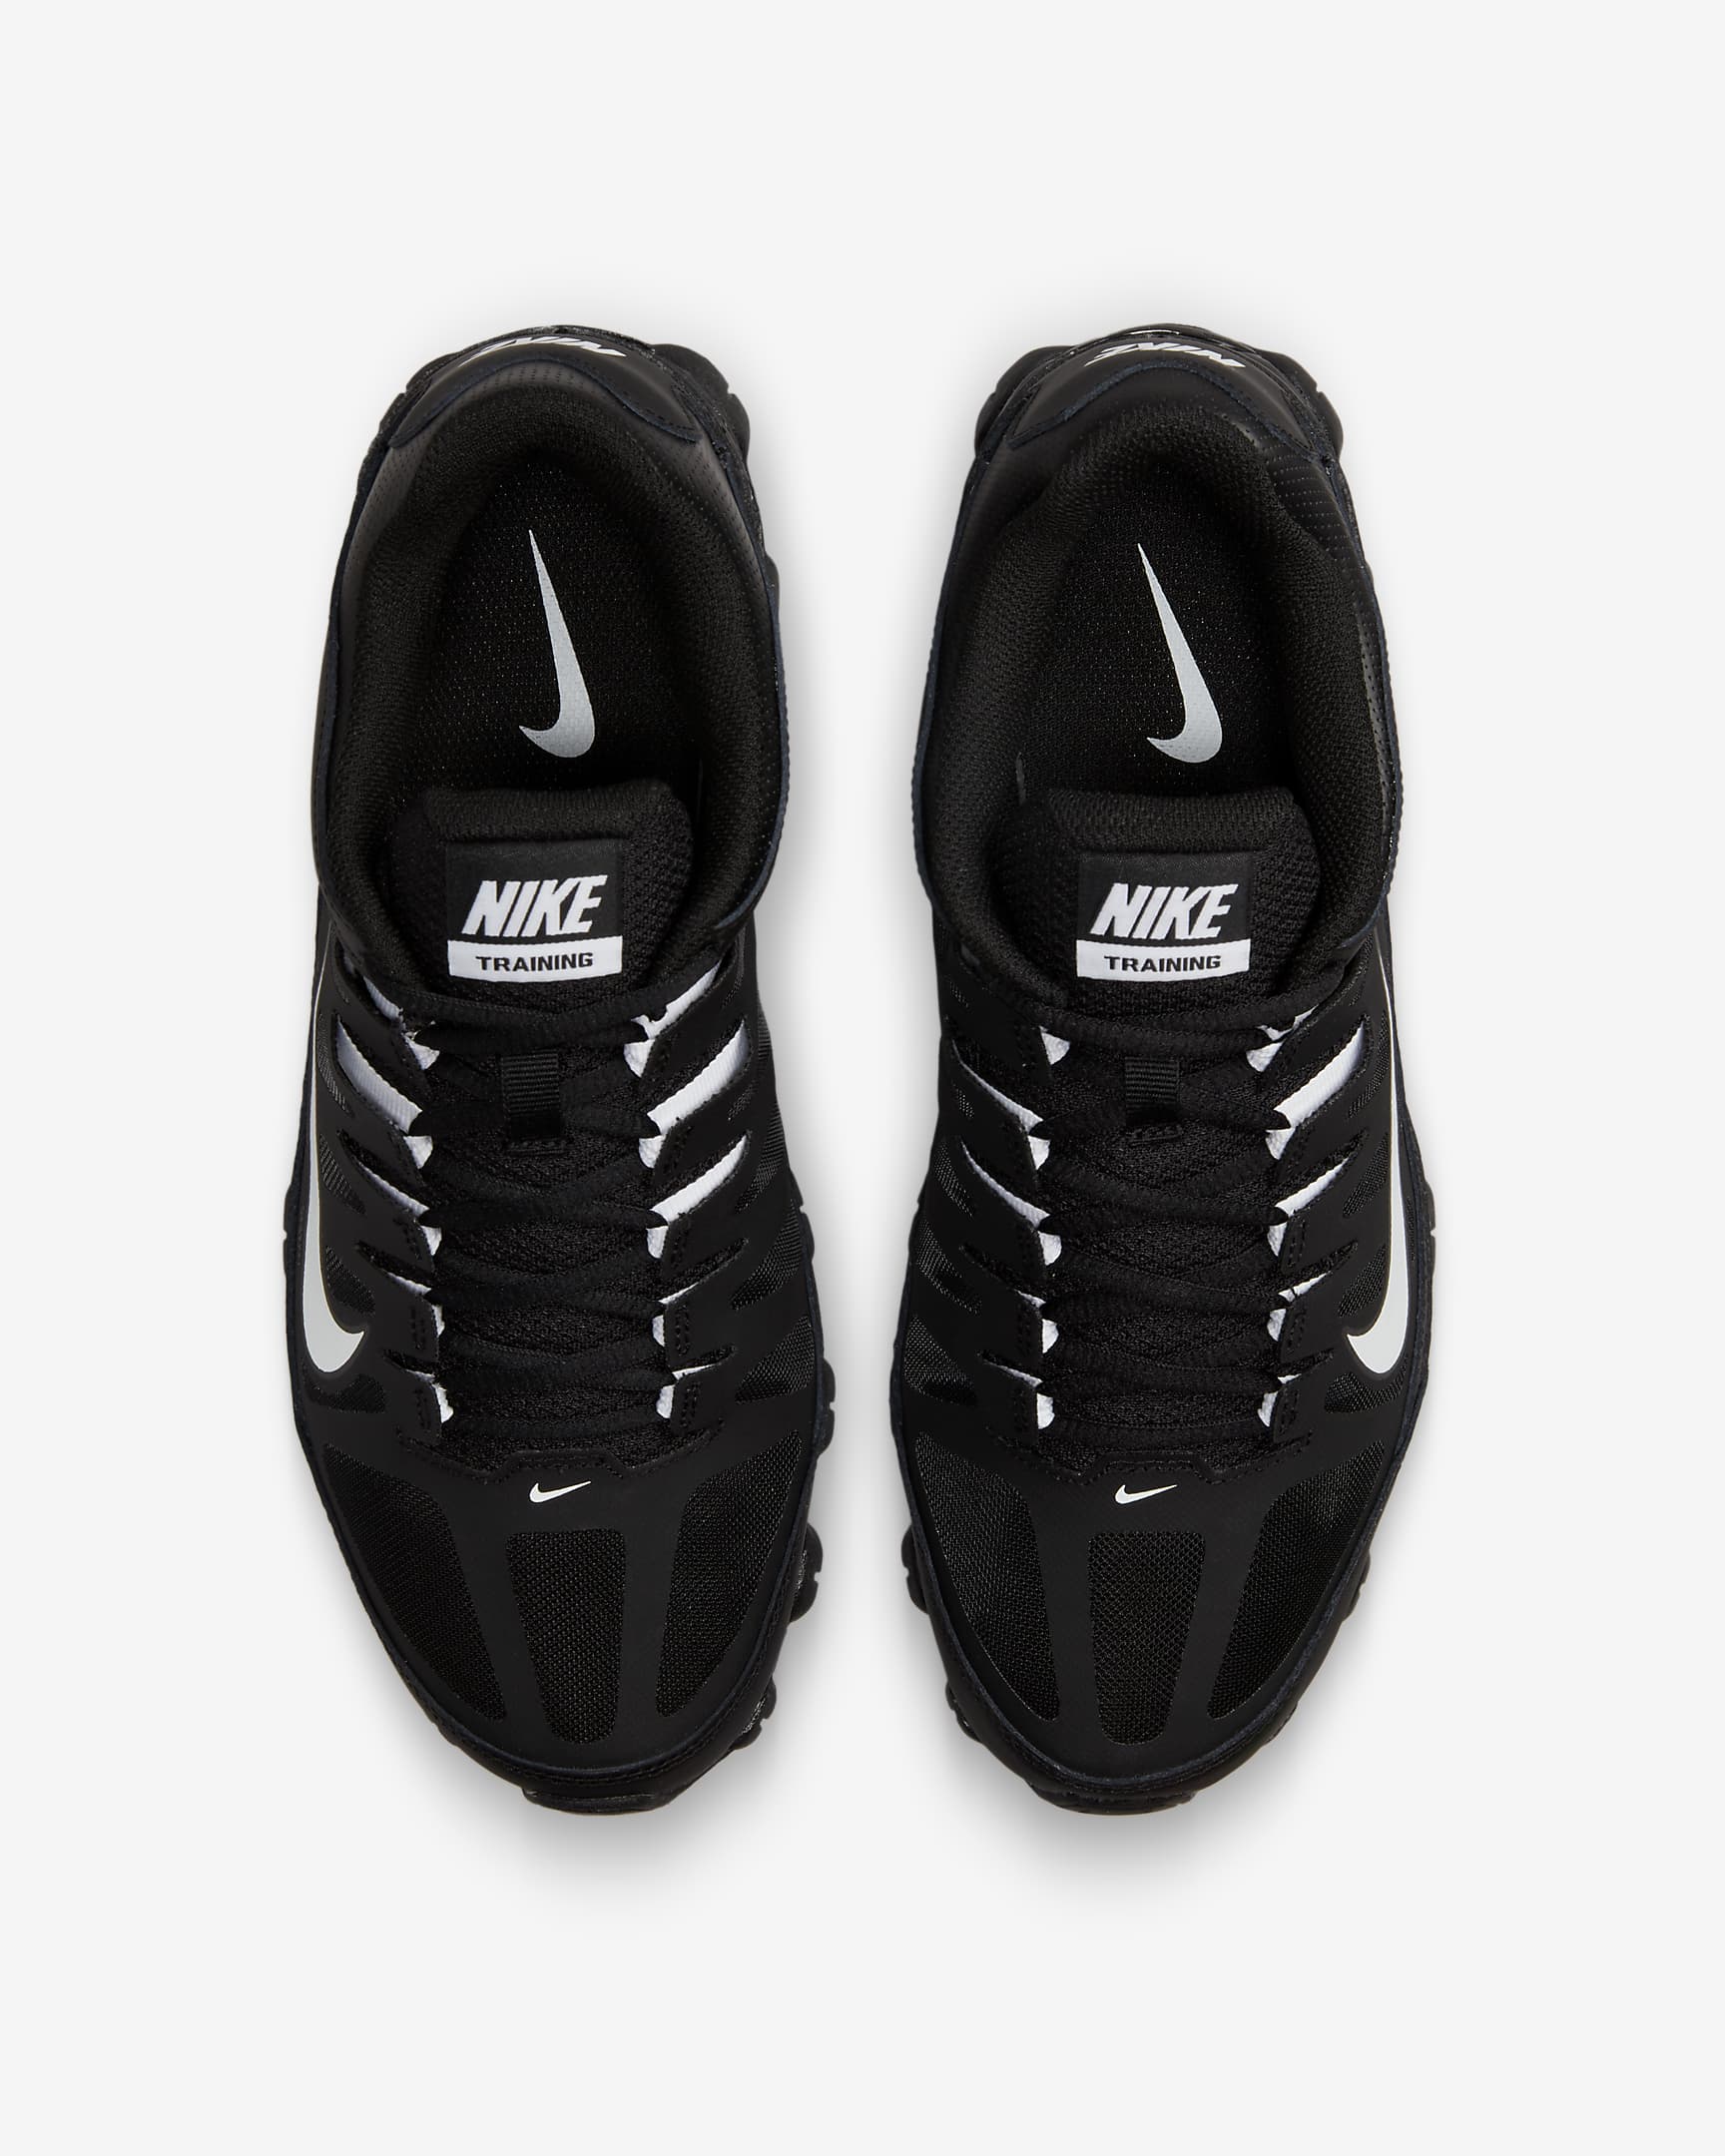 Nike Reax 8 TR Men's Workout Shoes. Nike AT